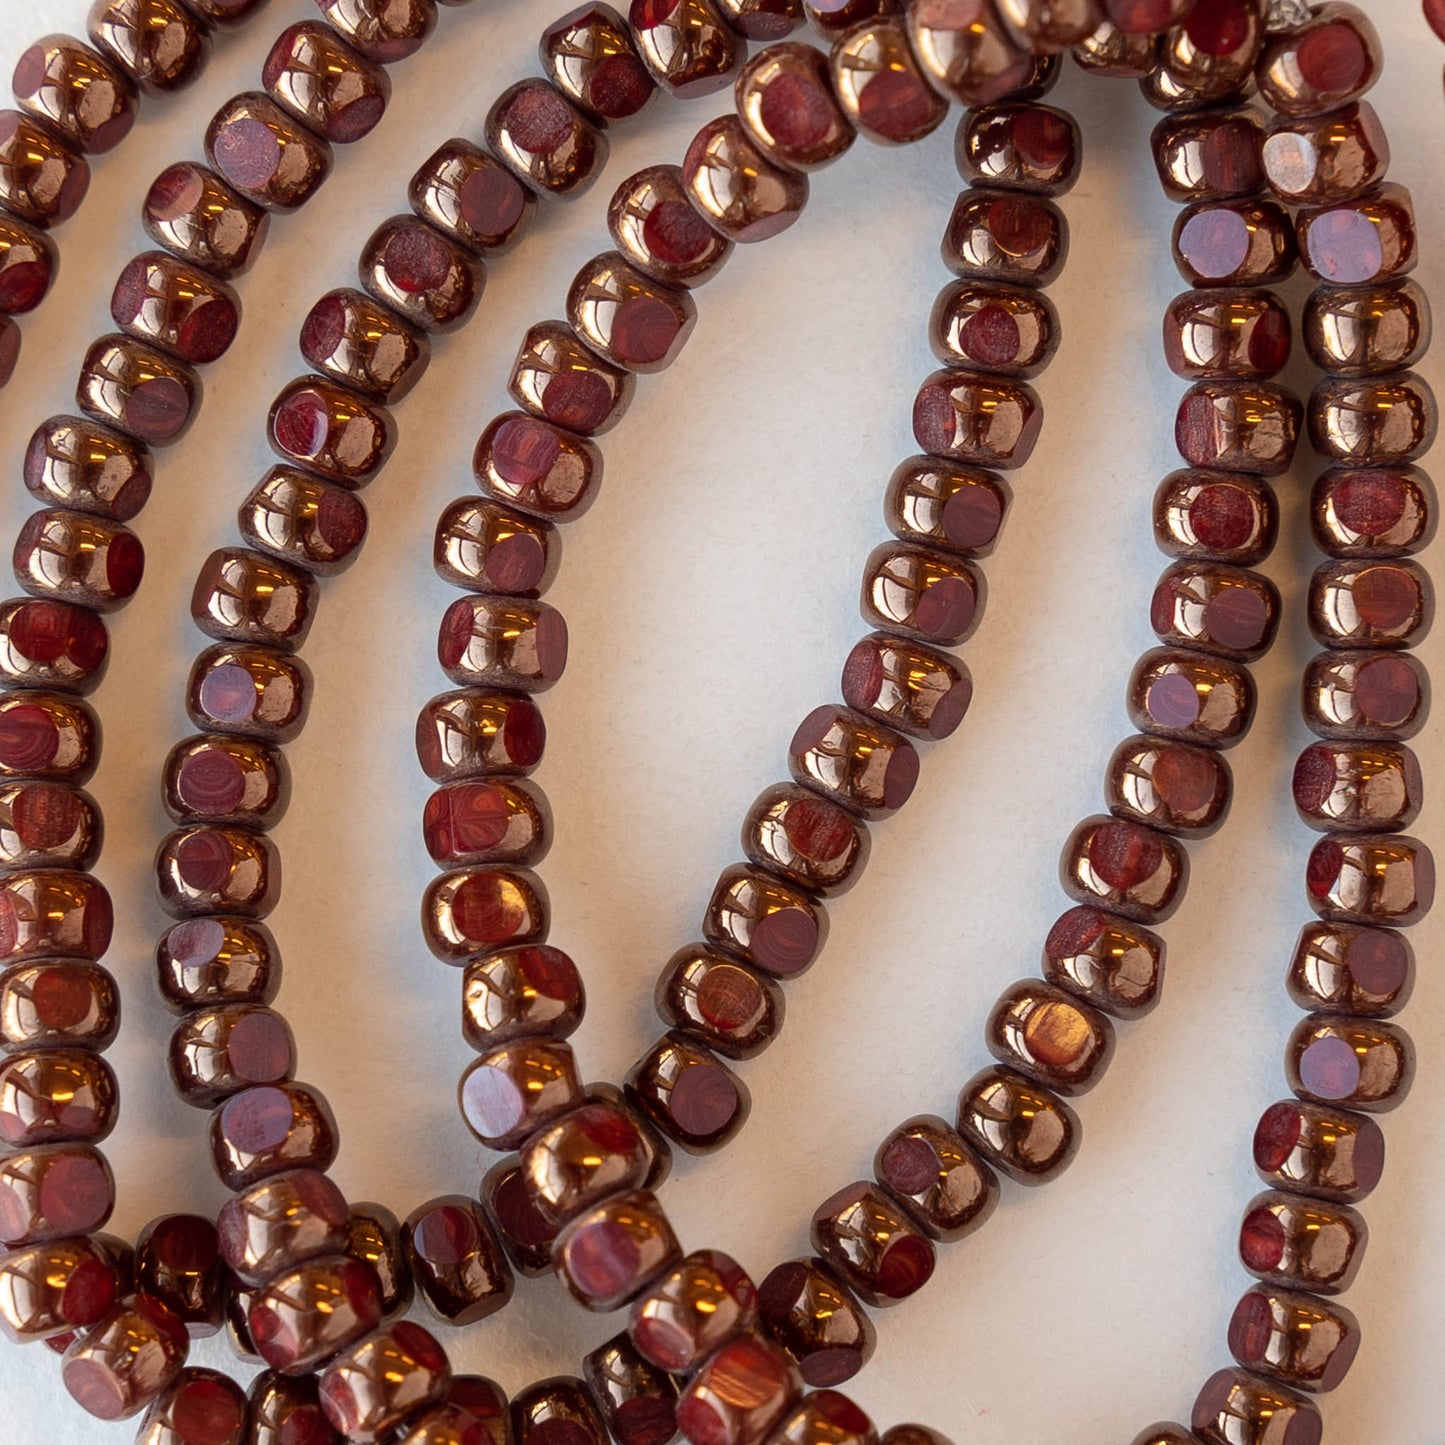 6/0 Tri-cut Seed Beads - Deep Red with Bronze Finish - 50